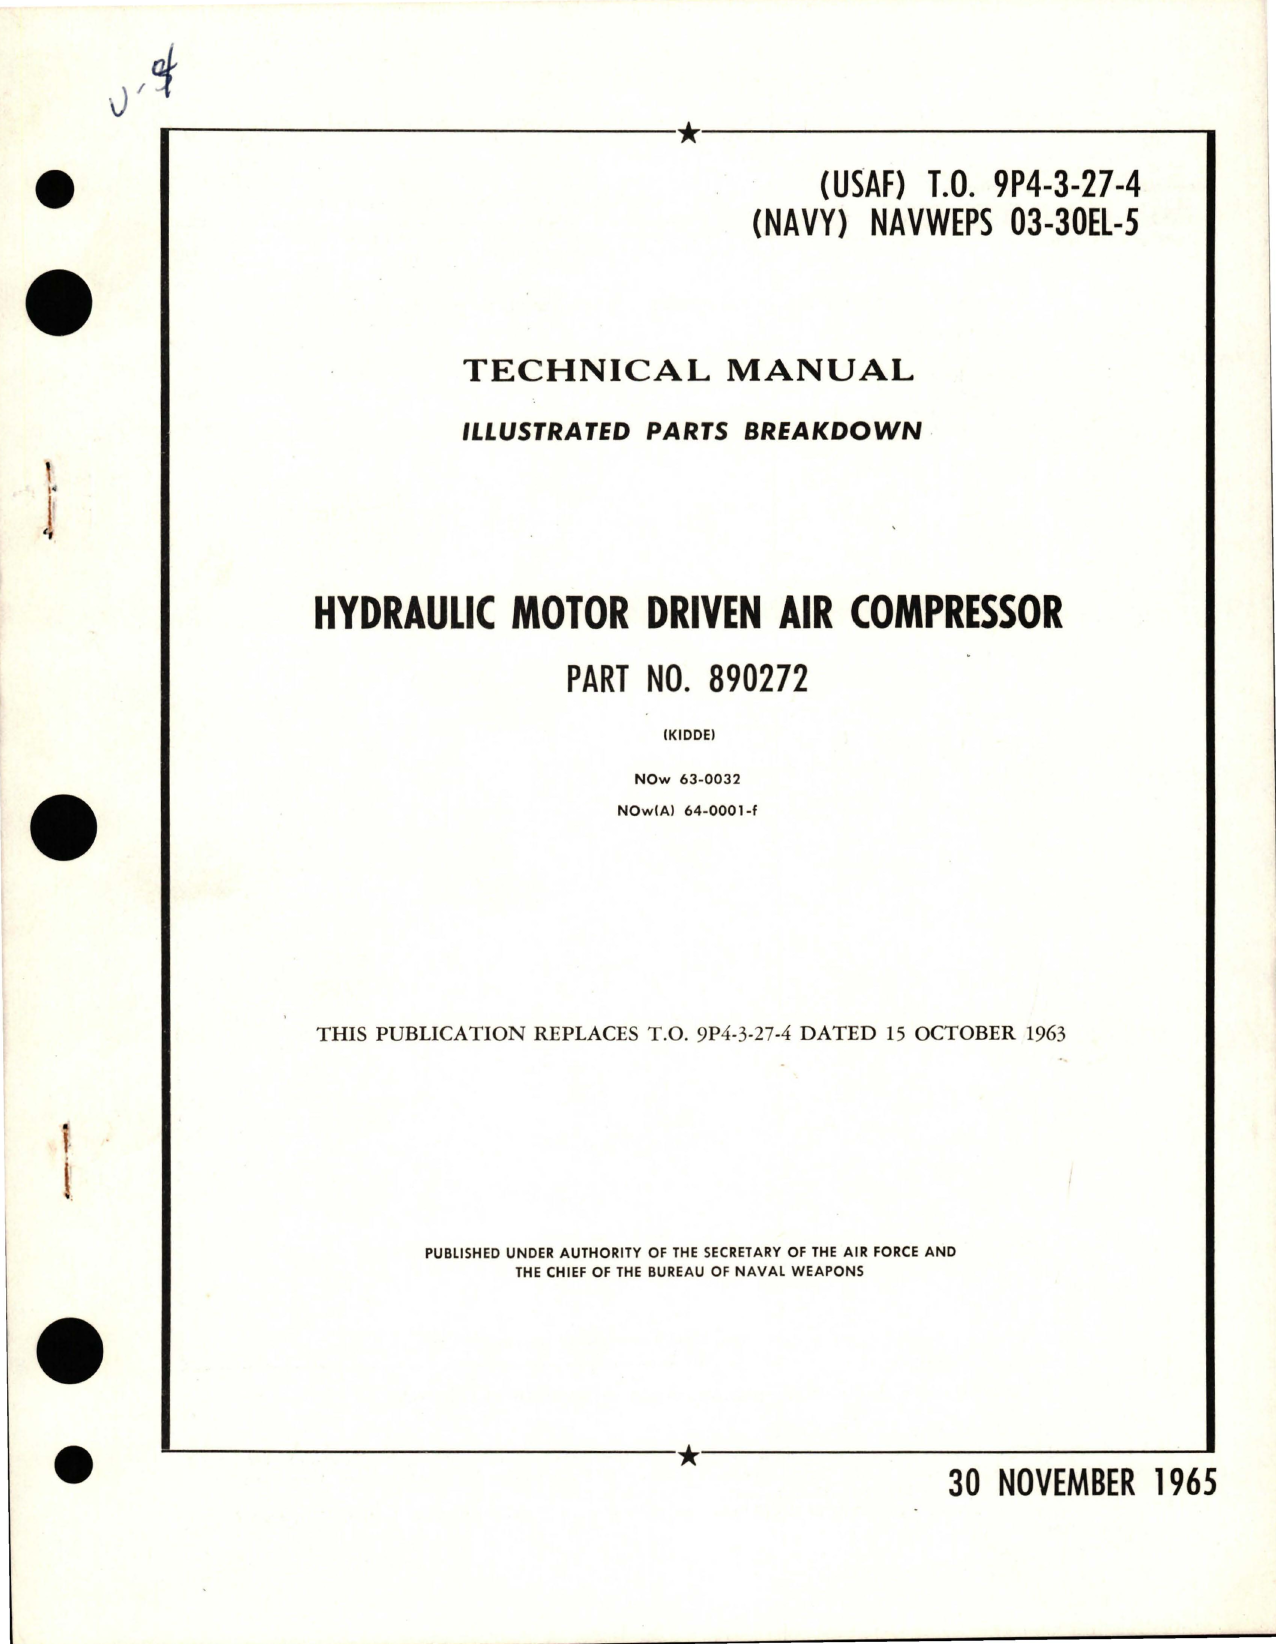 Sample page 1 from AirCorps Library document: Illustrated Parts Breakdown for Hydraulic Motor Driven Air Compressor - Part 890272 